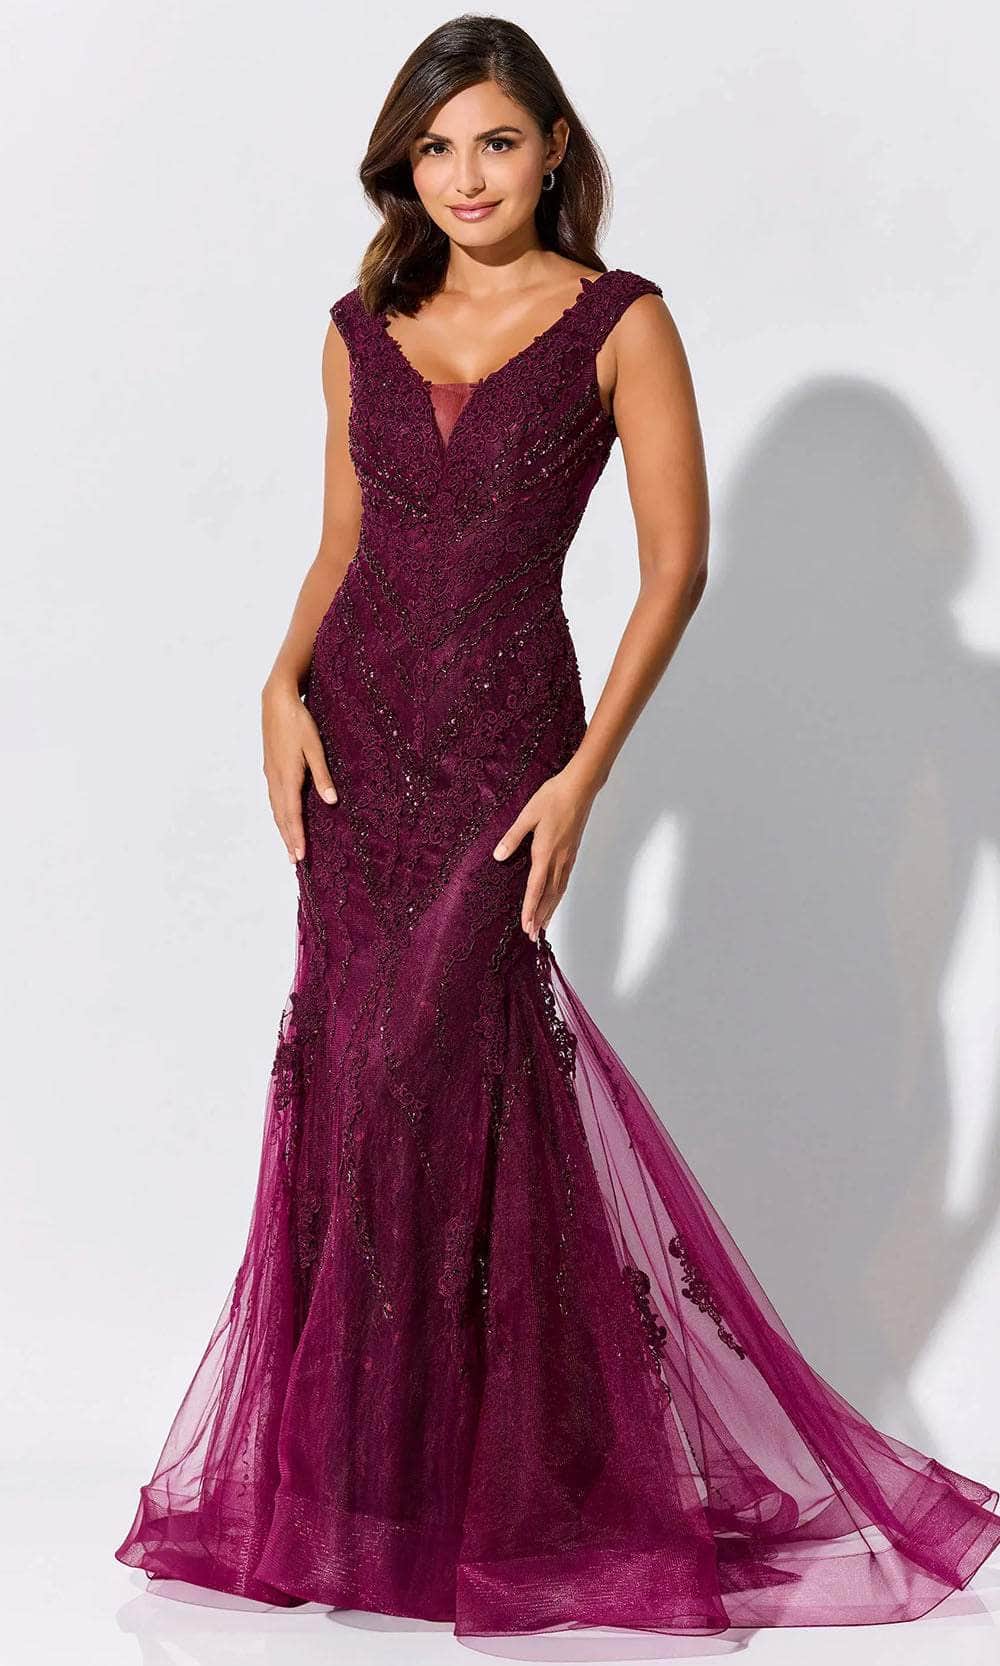 Ivonne-D ID317 - Stone Accented Mermaid Gown Prom Dresses 4 / Bordeaux